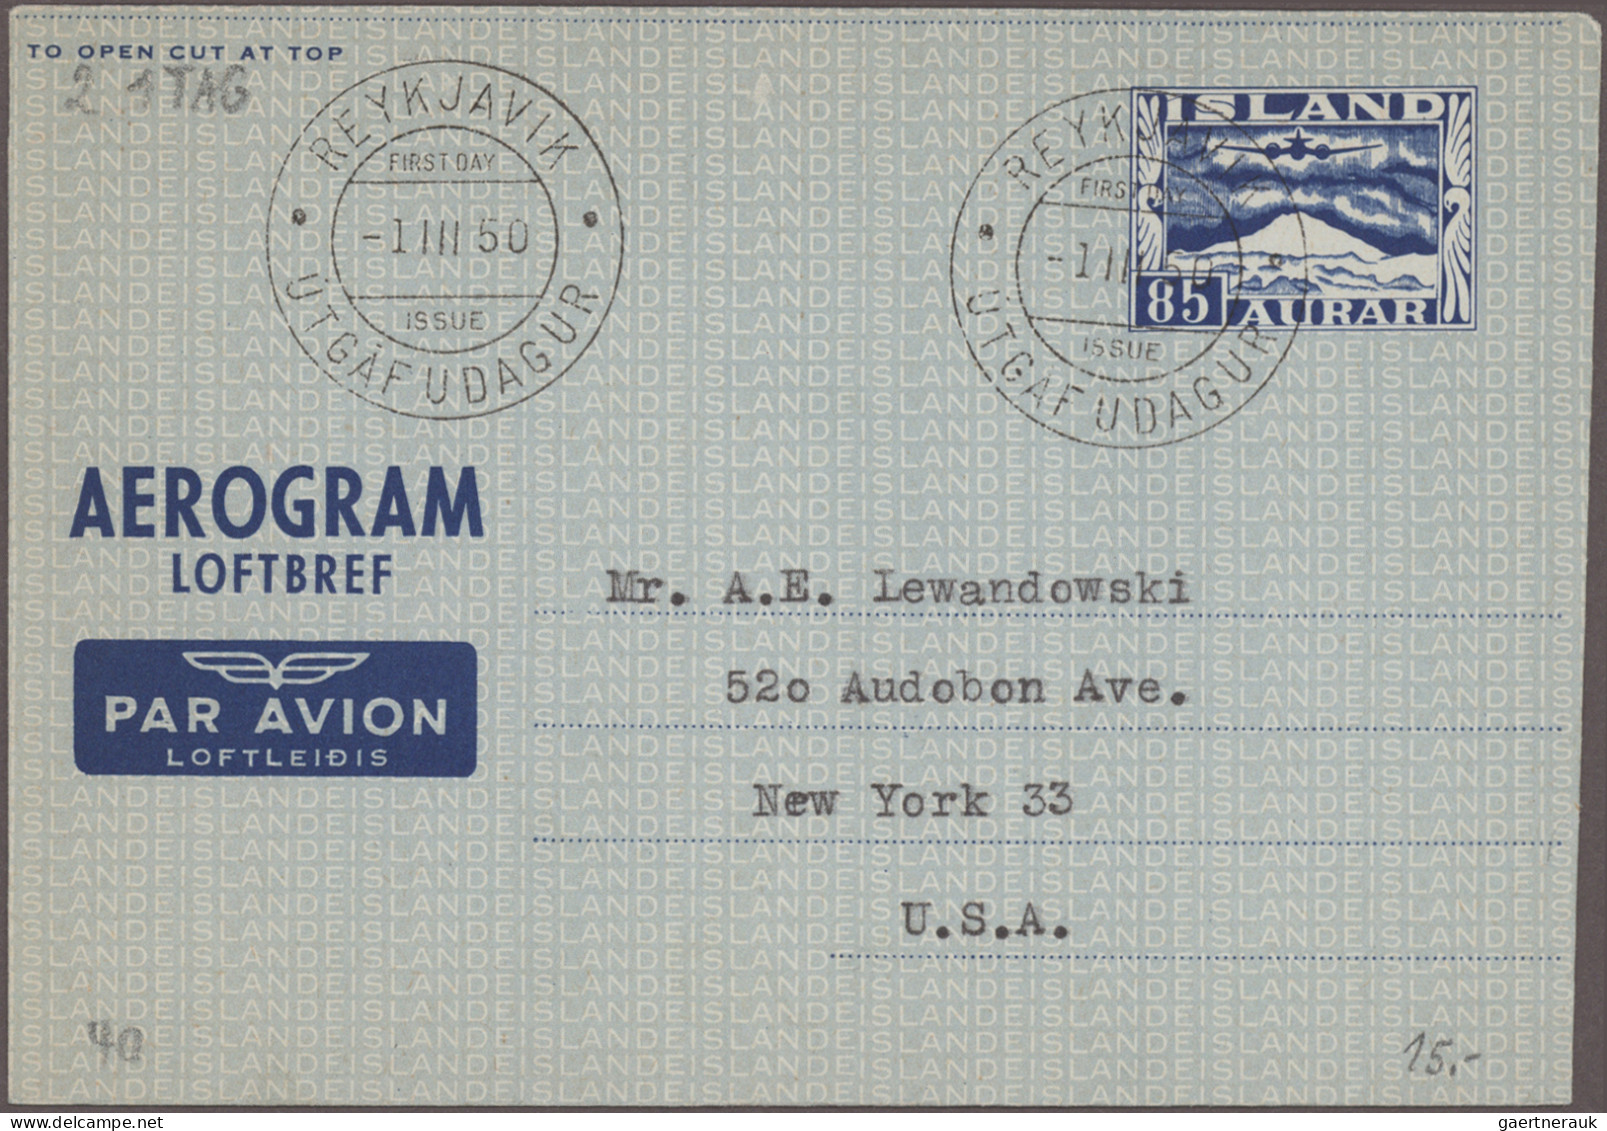 Aerogramme - Europe: 1950/1995 (ca.), holding of apprx. 415 air letter sheets, m